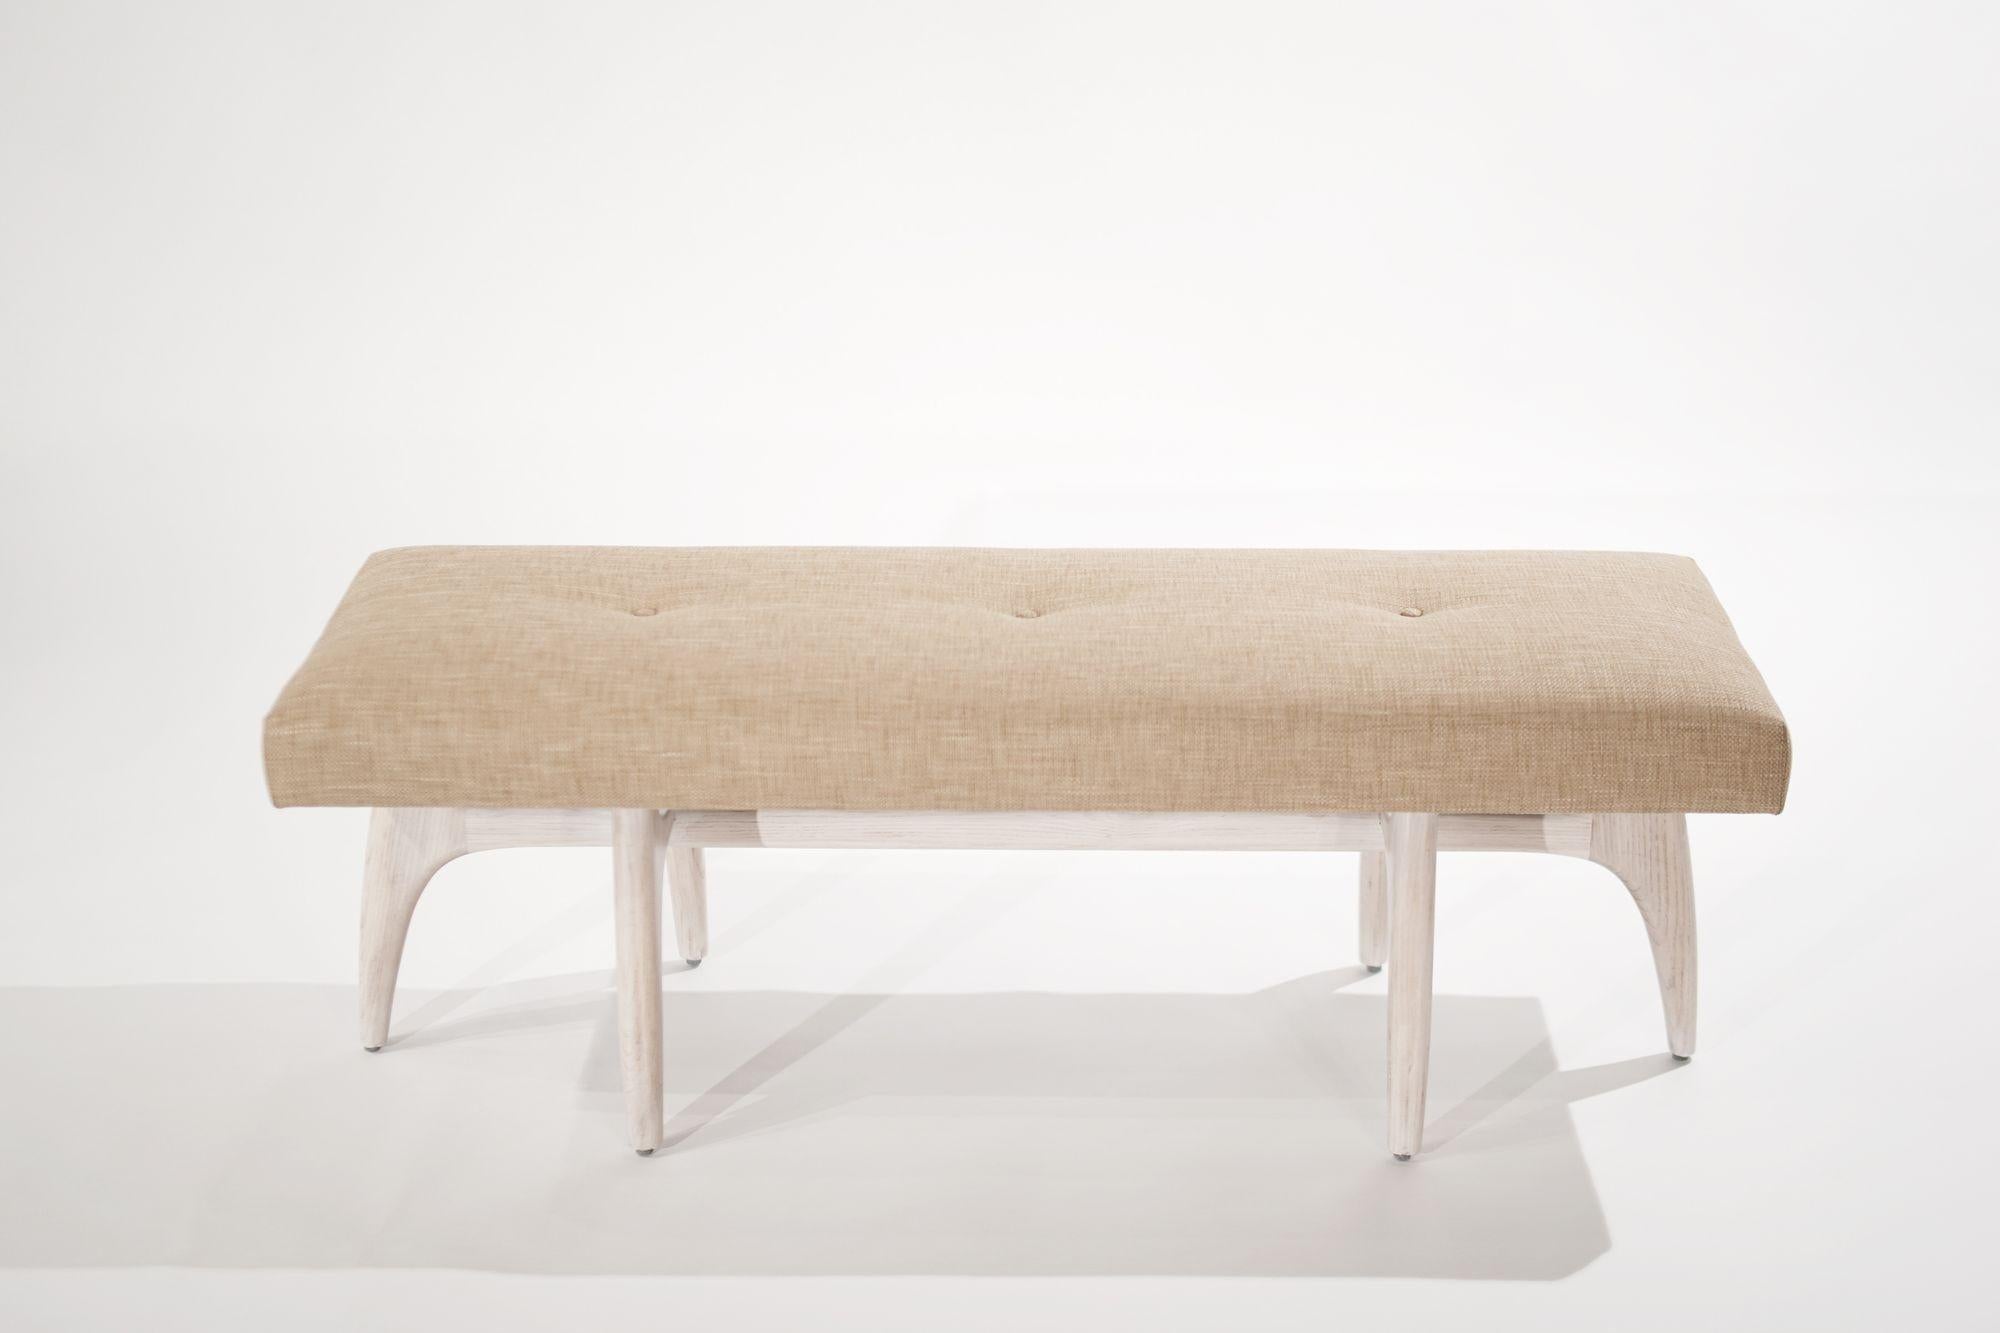 Introducing the Odyssey Bench by Stamford Modern, a captivating fusion of sculptural artistry and impeccable craftsmanship. Constructed from solid oak or walnut, this bench exudes both durability and timeless elegance. With seven versatile finishes